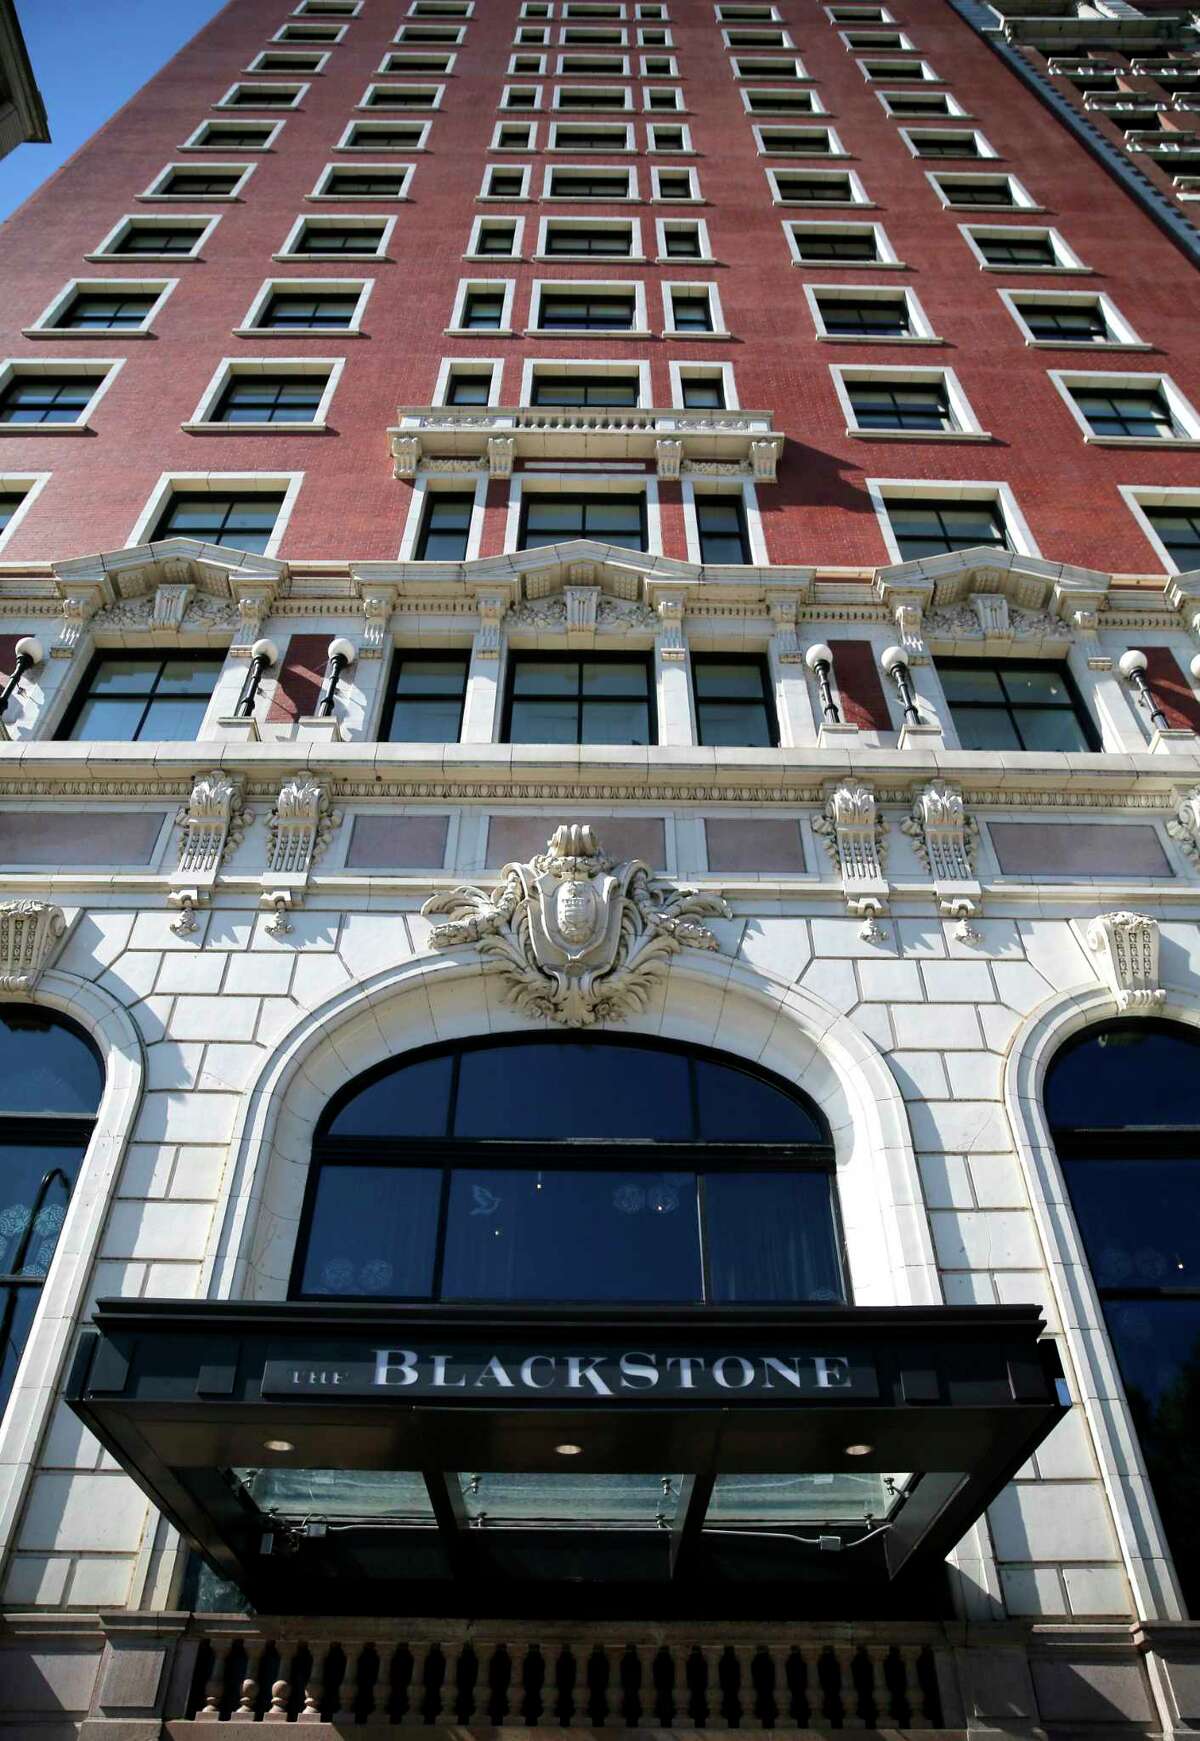 The Blackstone Hotel sits on Michigan Avenue across the street from Chicago's Grant Park on Thursday, Oct. 5, 2017, in Chicago. Stephen Paddock, opened fire on an outdoor music concert on Sunday, Oct. 1, killing dozens and injuring hundreds in Las Vegas. In August, Paddock, booked a room at the Blackstone Hotel that overlooks the park where the Lollapalooza music festival was held that weekend, a law enforcement official said Thursday, Oct. 5, 2017. (AP Photo/Charles Rex Arbogast)